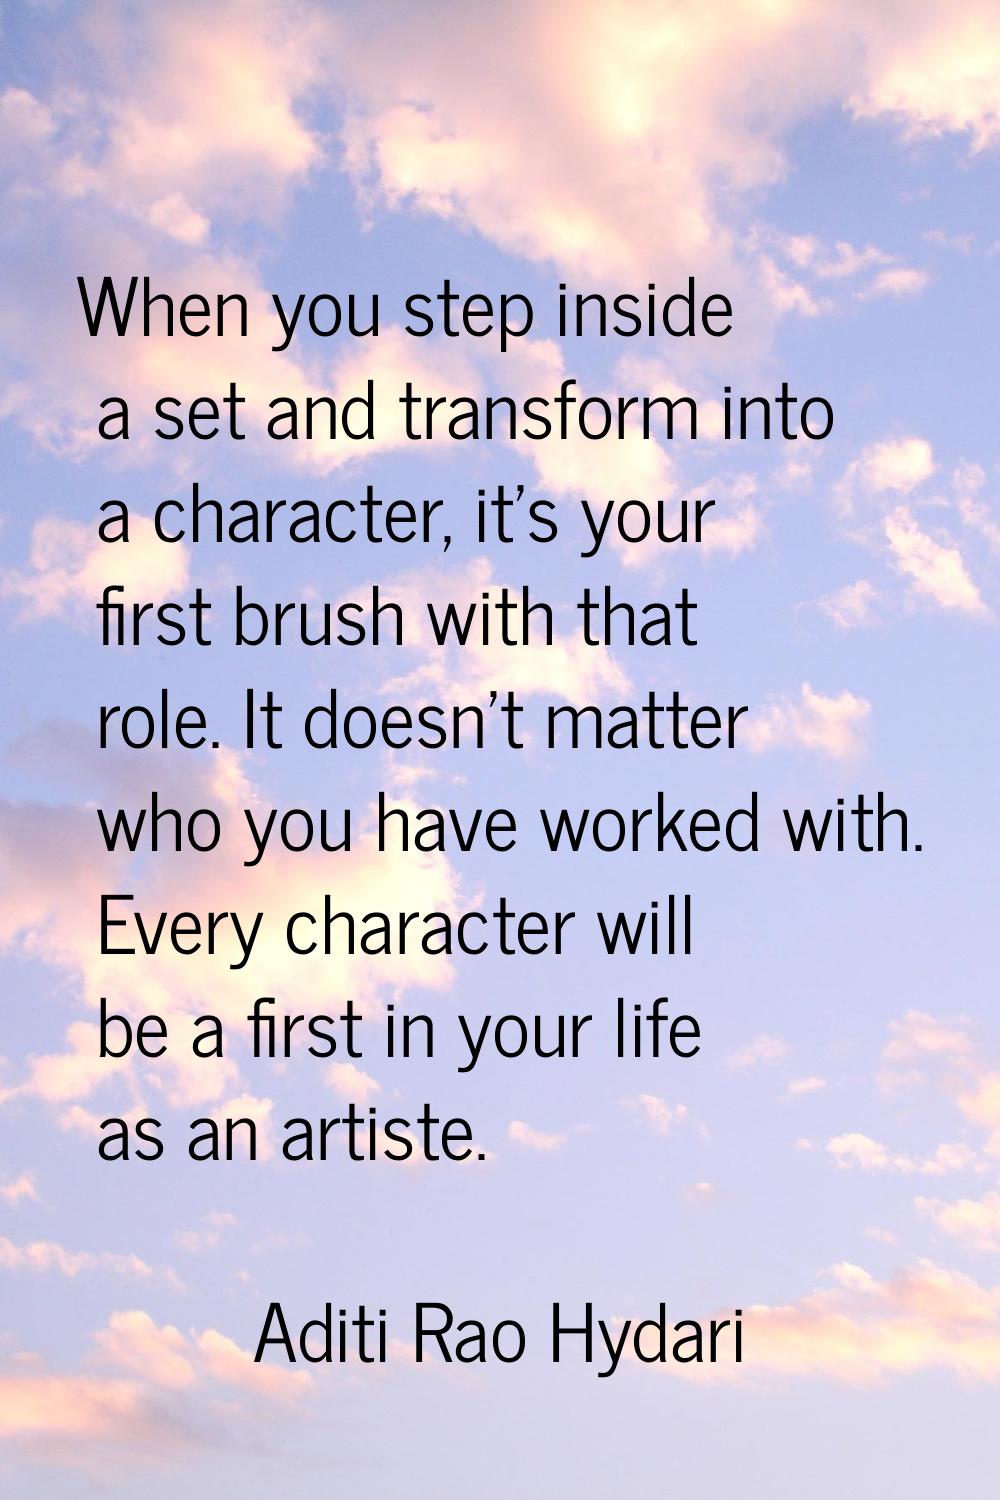 When you step inside a set and transform into a character, it's your first brush with that role. It